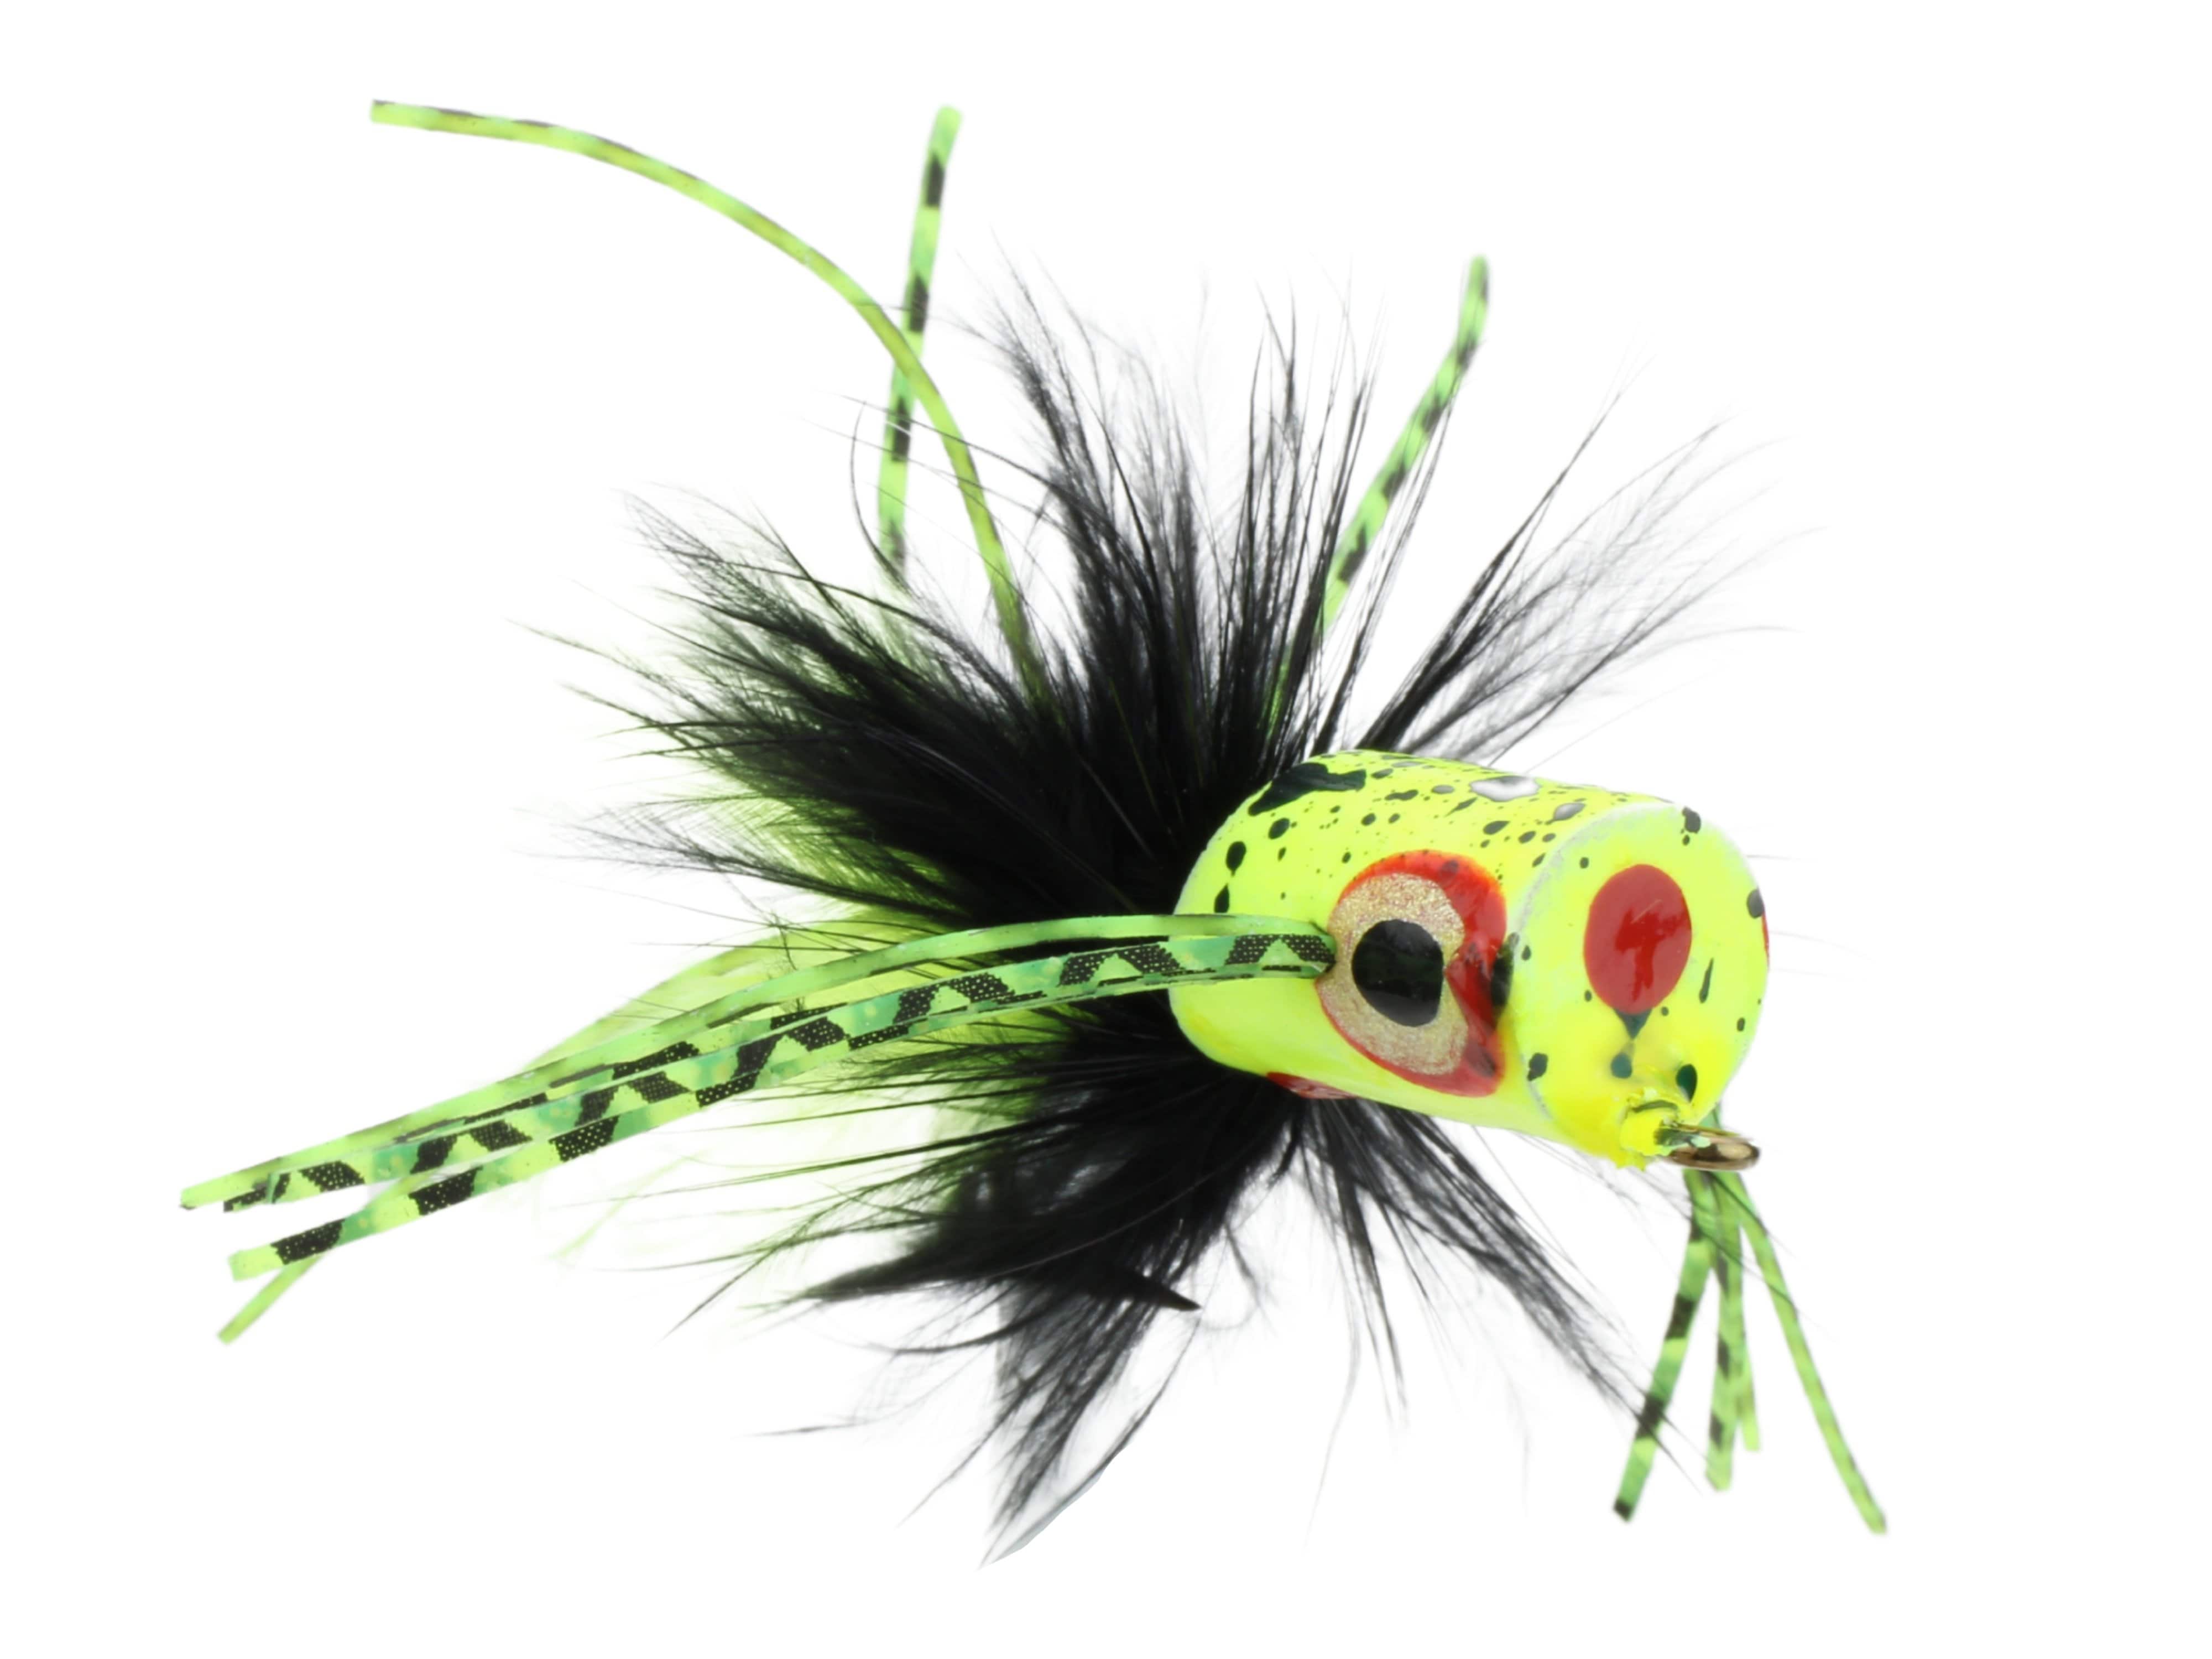 Wild Water Fly Fishing Green and Yellow Spider Legs Flat Face Mini Panfish Popper, Size 6, Qty. 4